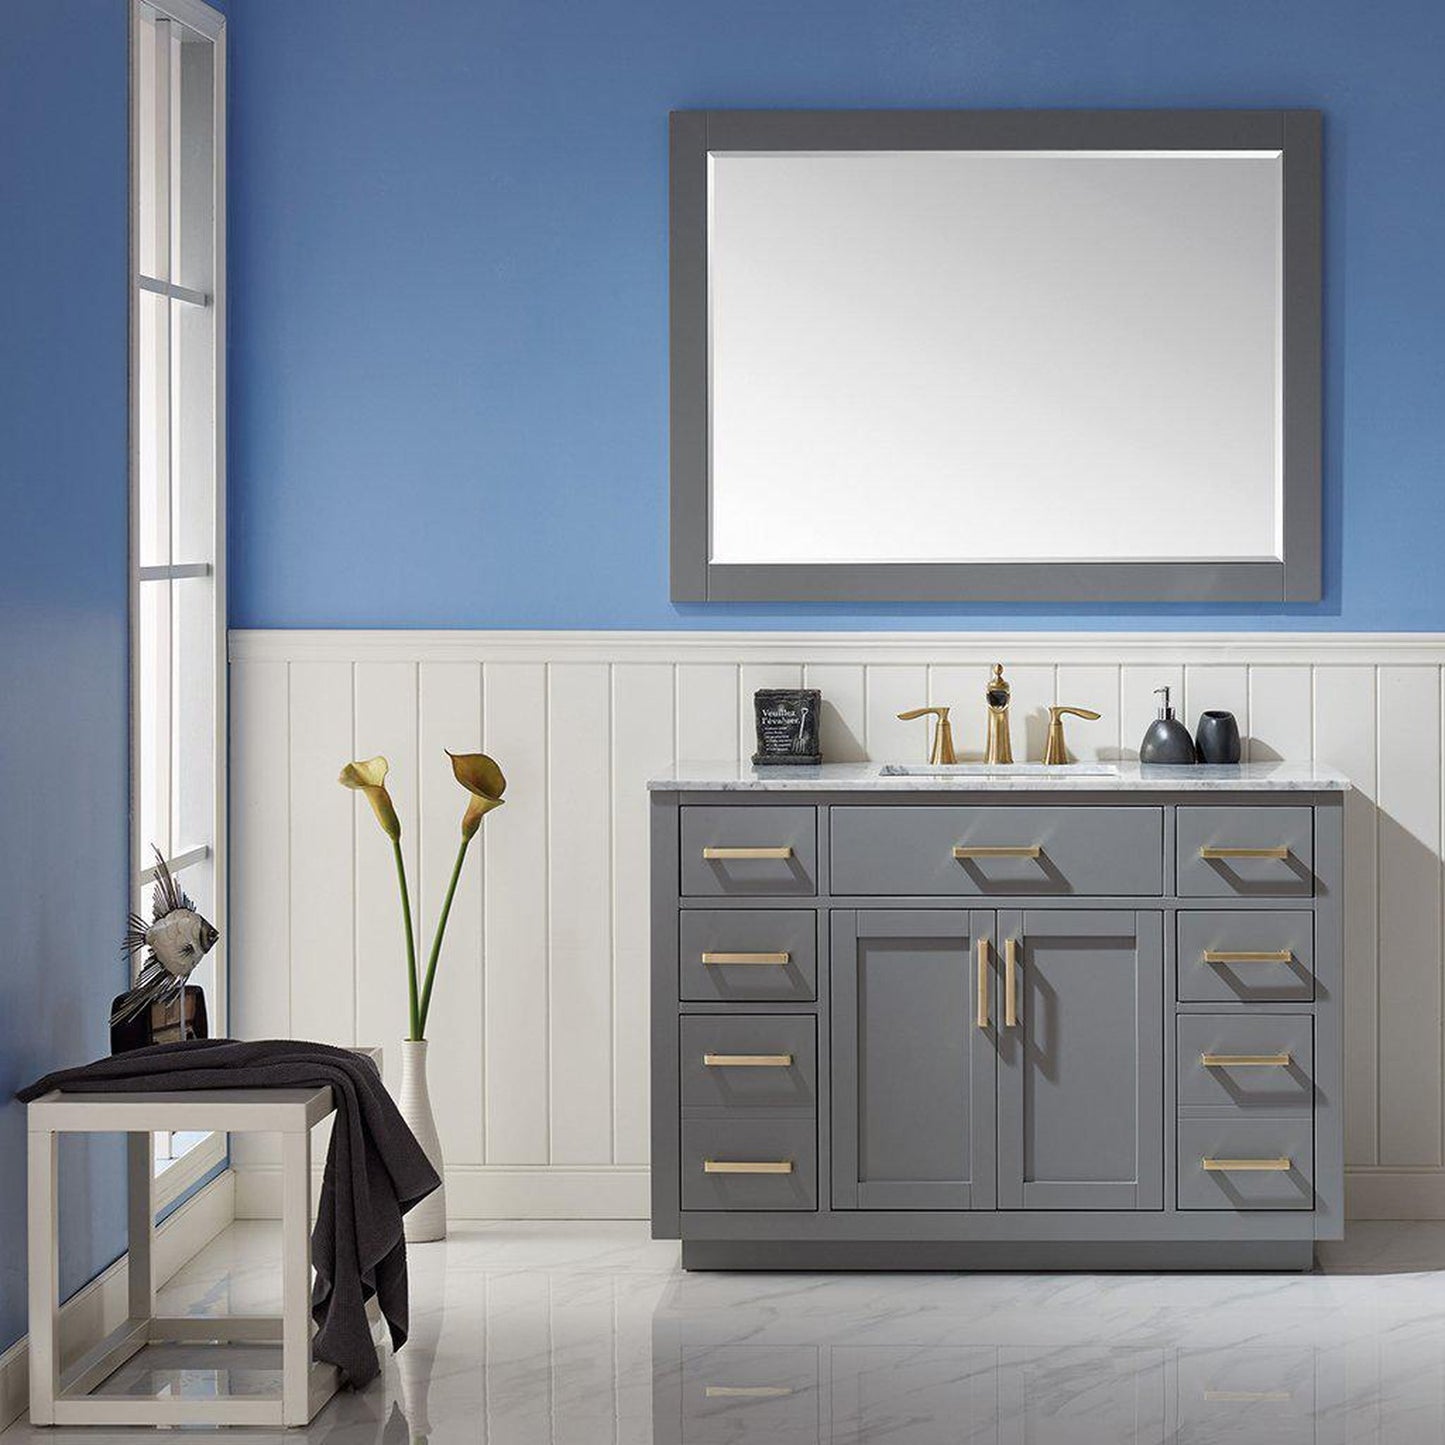 Altair Ivy 48" Single Gray Freestanding Bathroom Vanity Set With Mirror, Natural Carrara White Marble Top, Rectangular Undermount Ceramic Sink, and Overflow